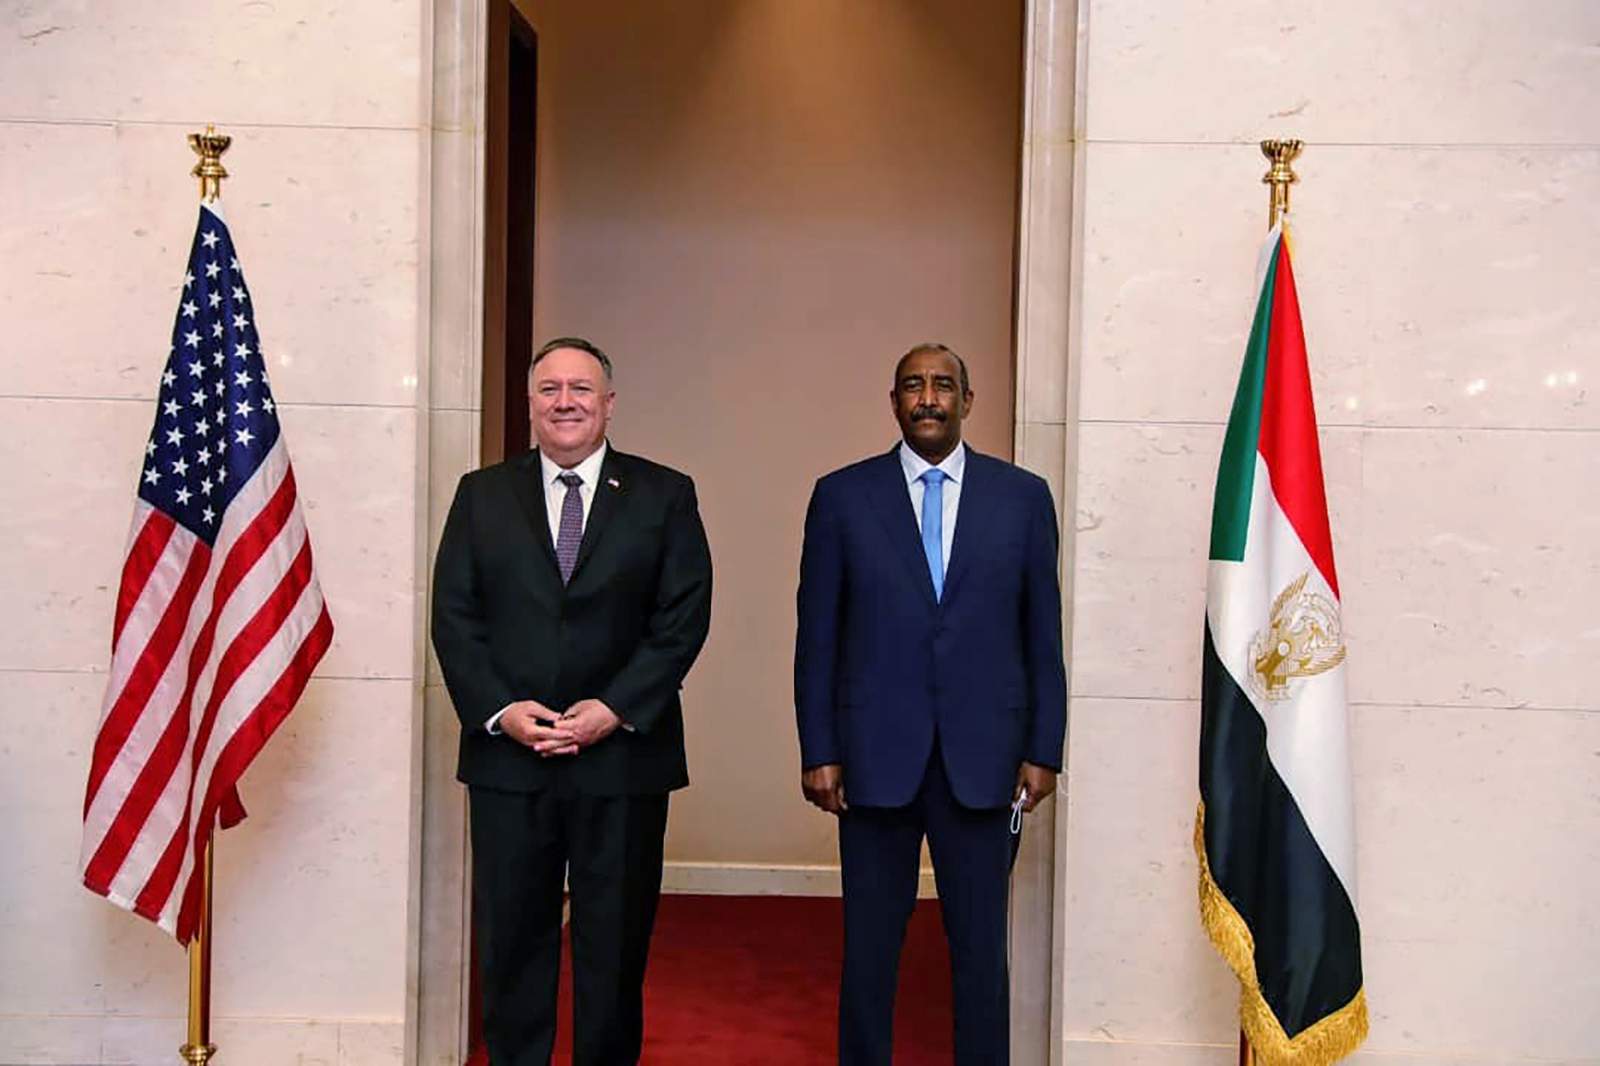 Sudanese officials: Diplomatic deal with Israel is near